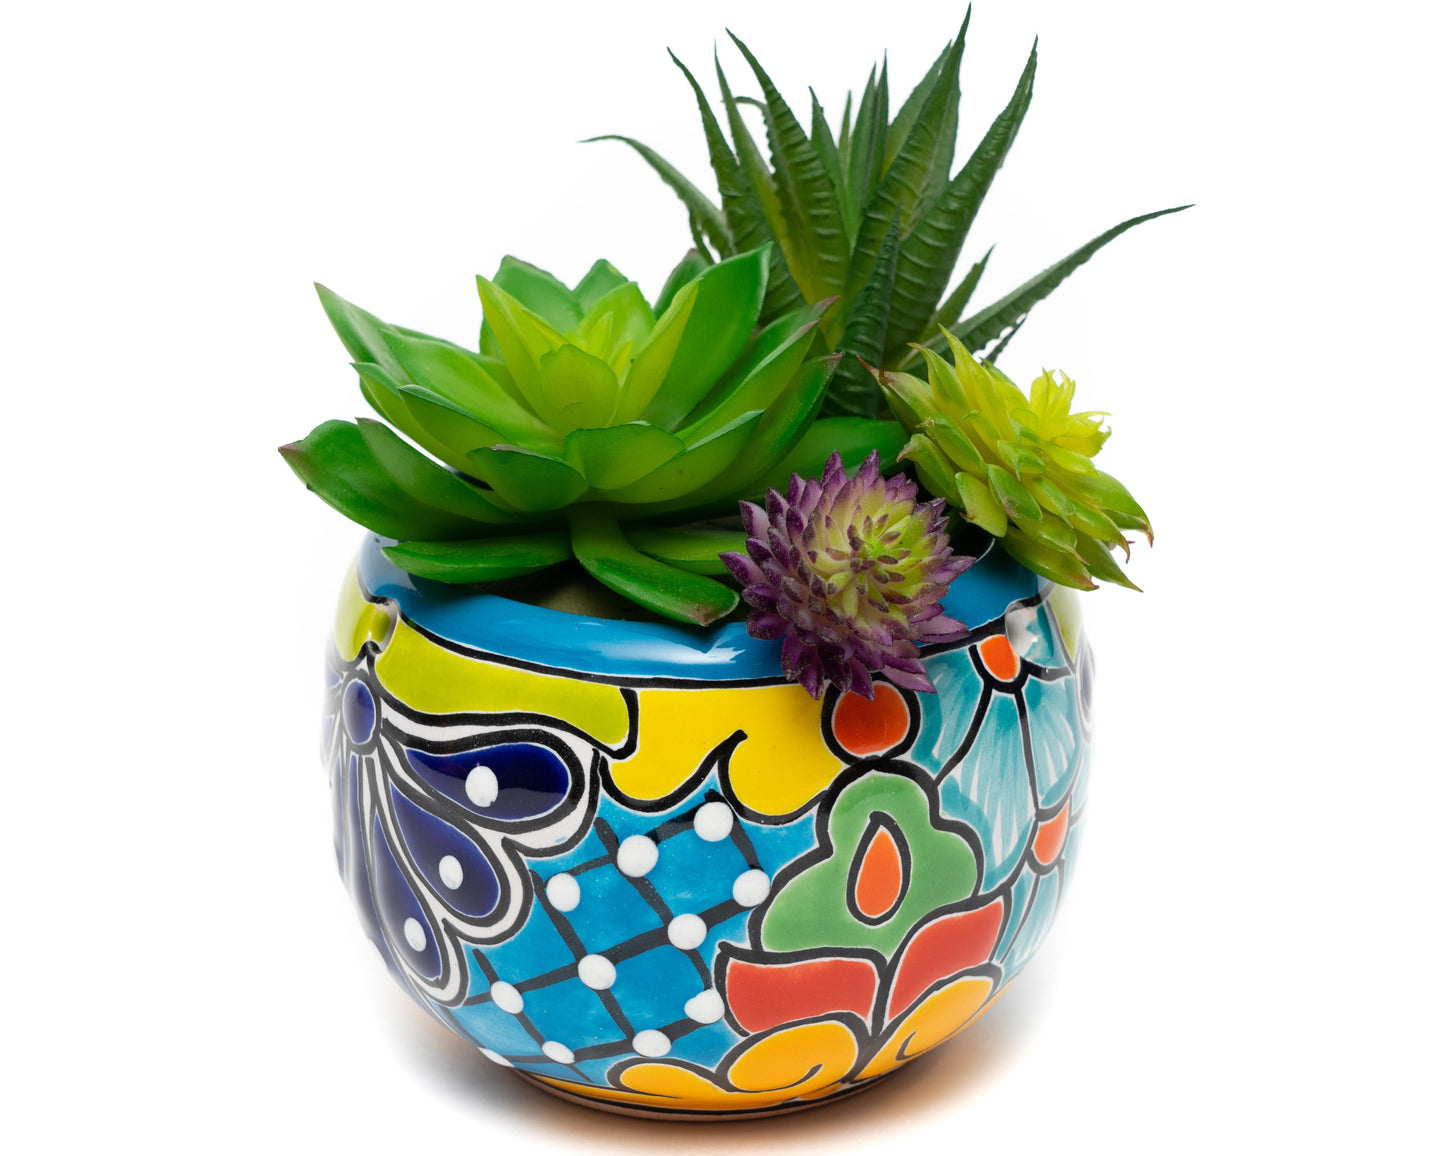 Bowl Planter - Small (1PC) - Turquoise